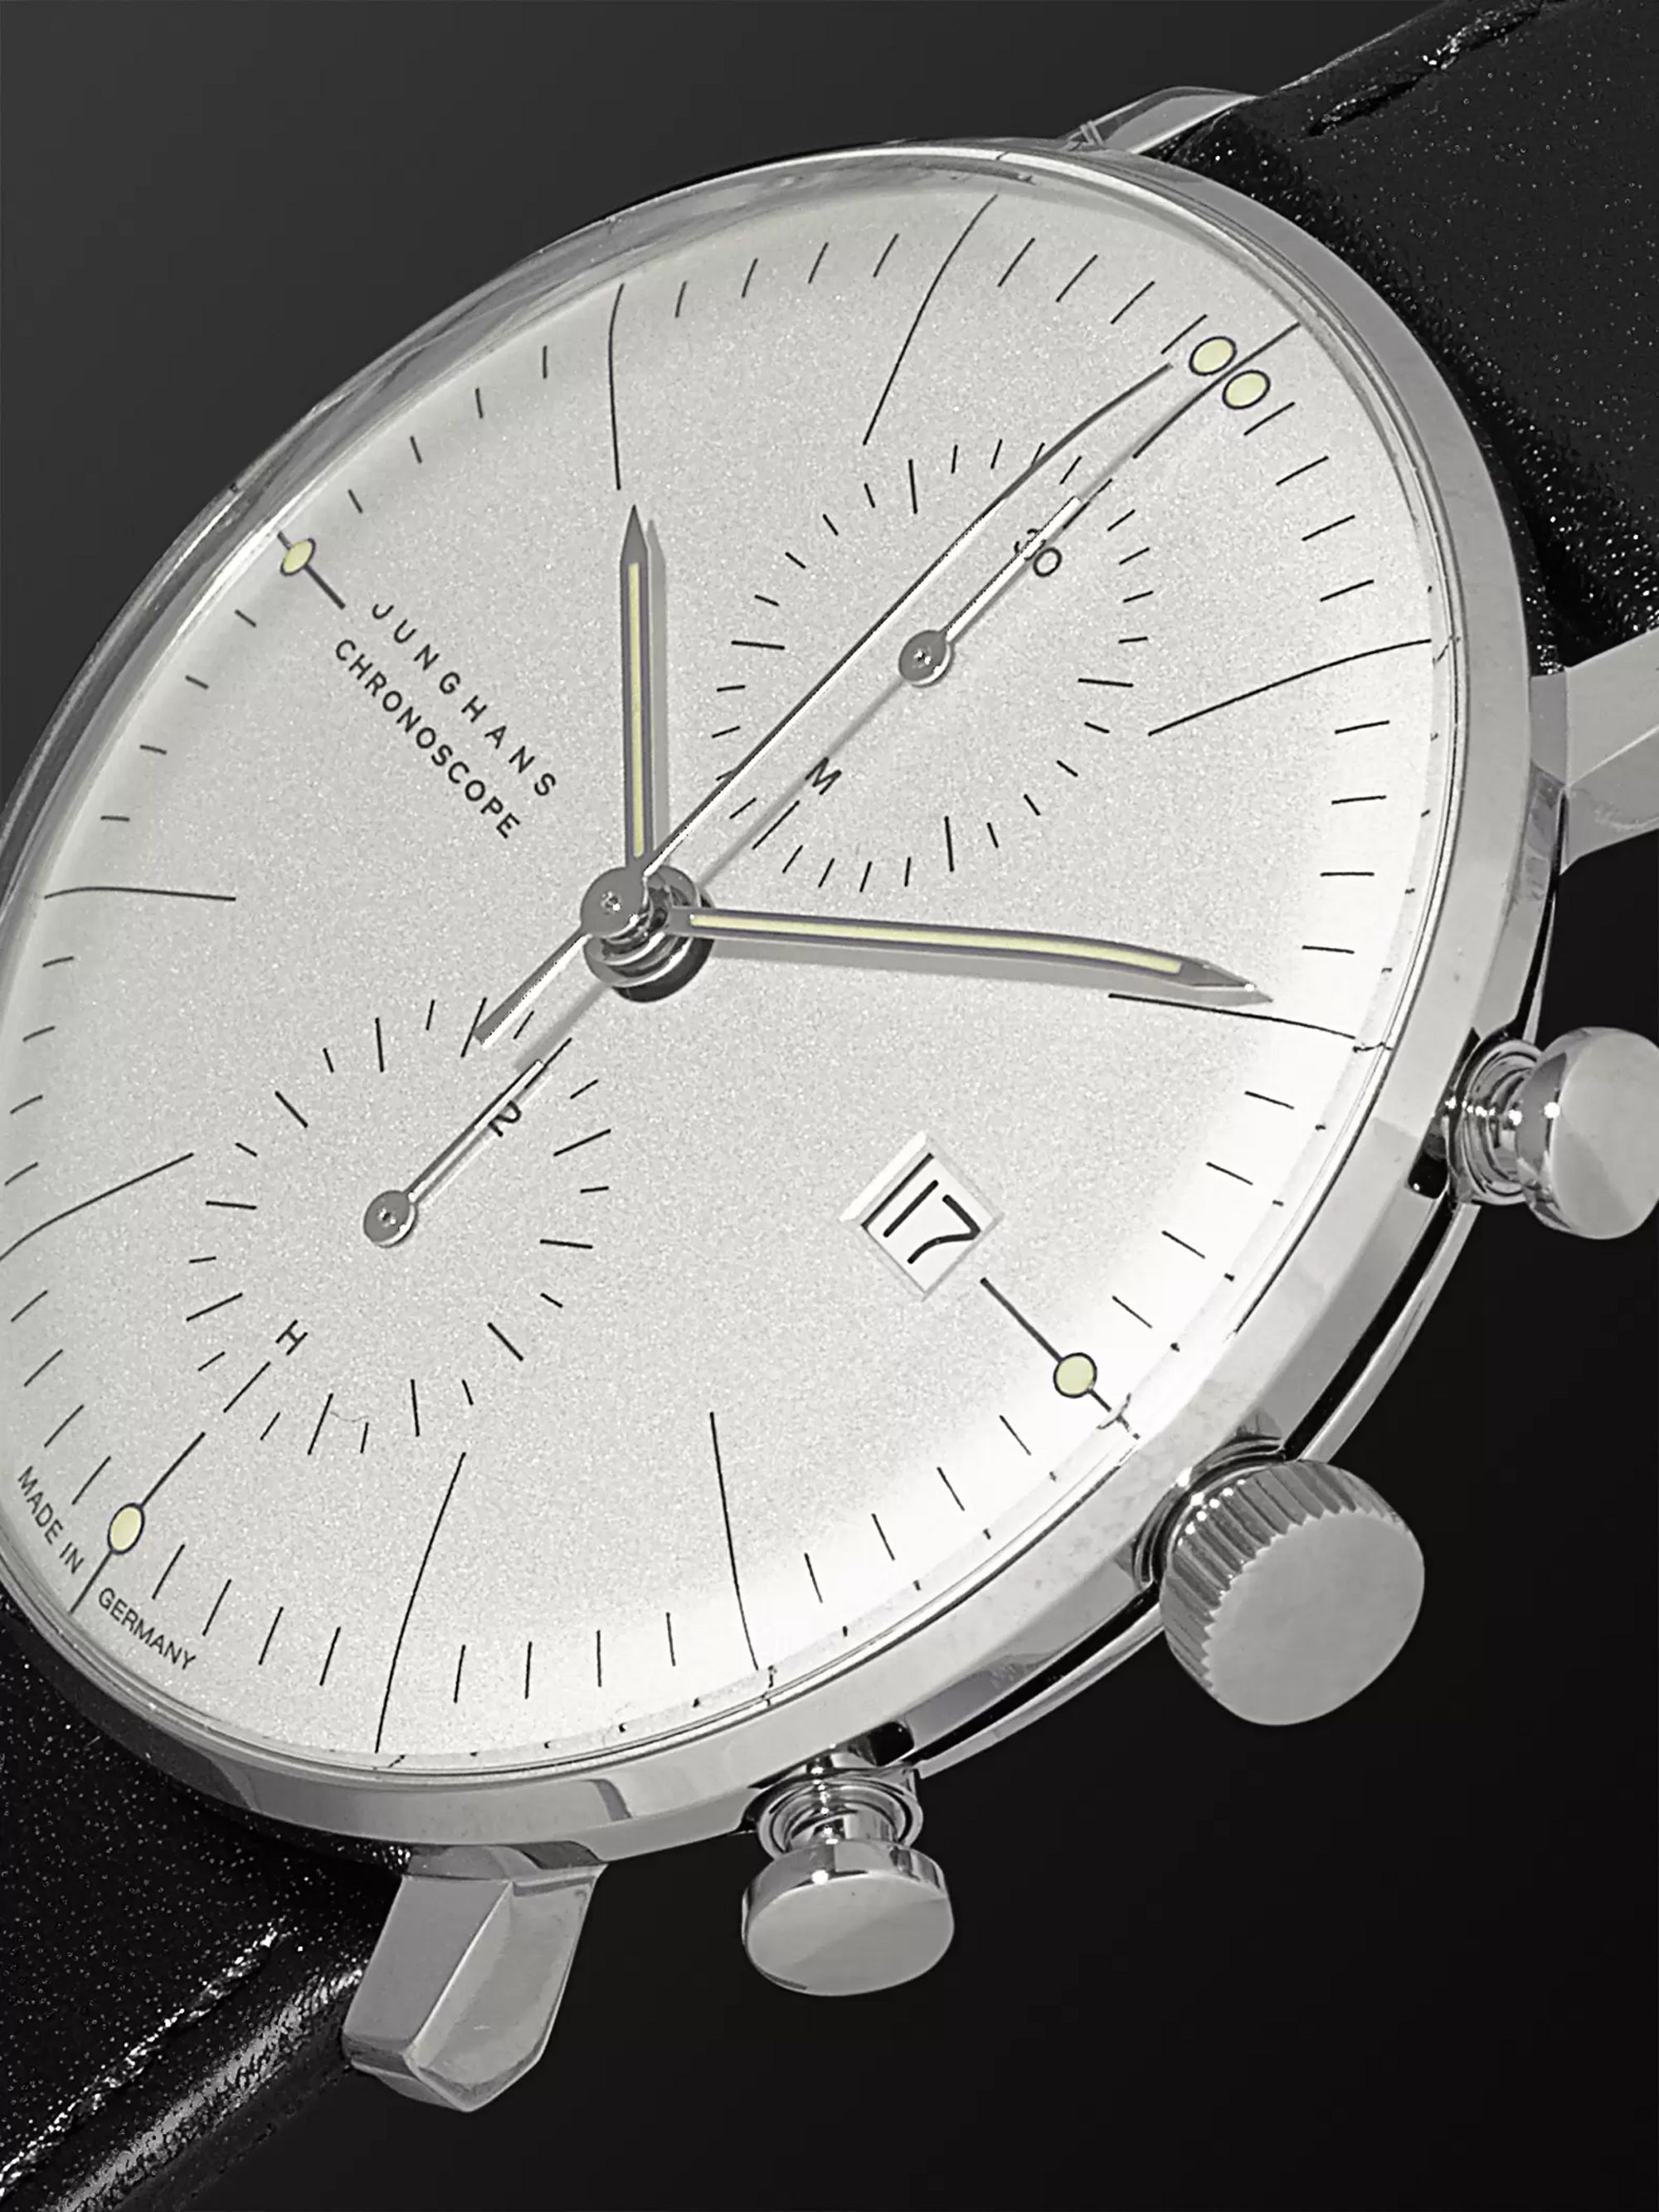 JUNGHANS Max Bill Automatic Chronoscope 40mm Stainless Steel and Leather Watch, Ref. No. 027/4600.04